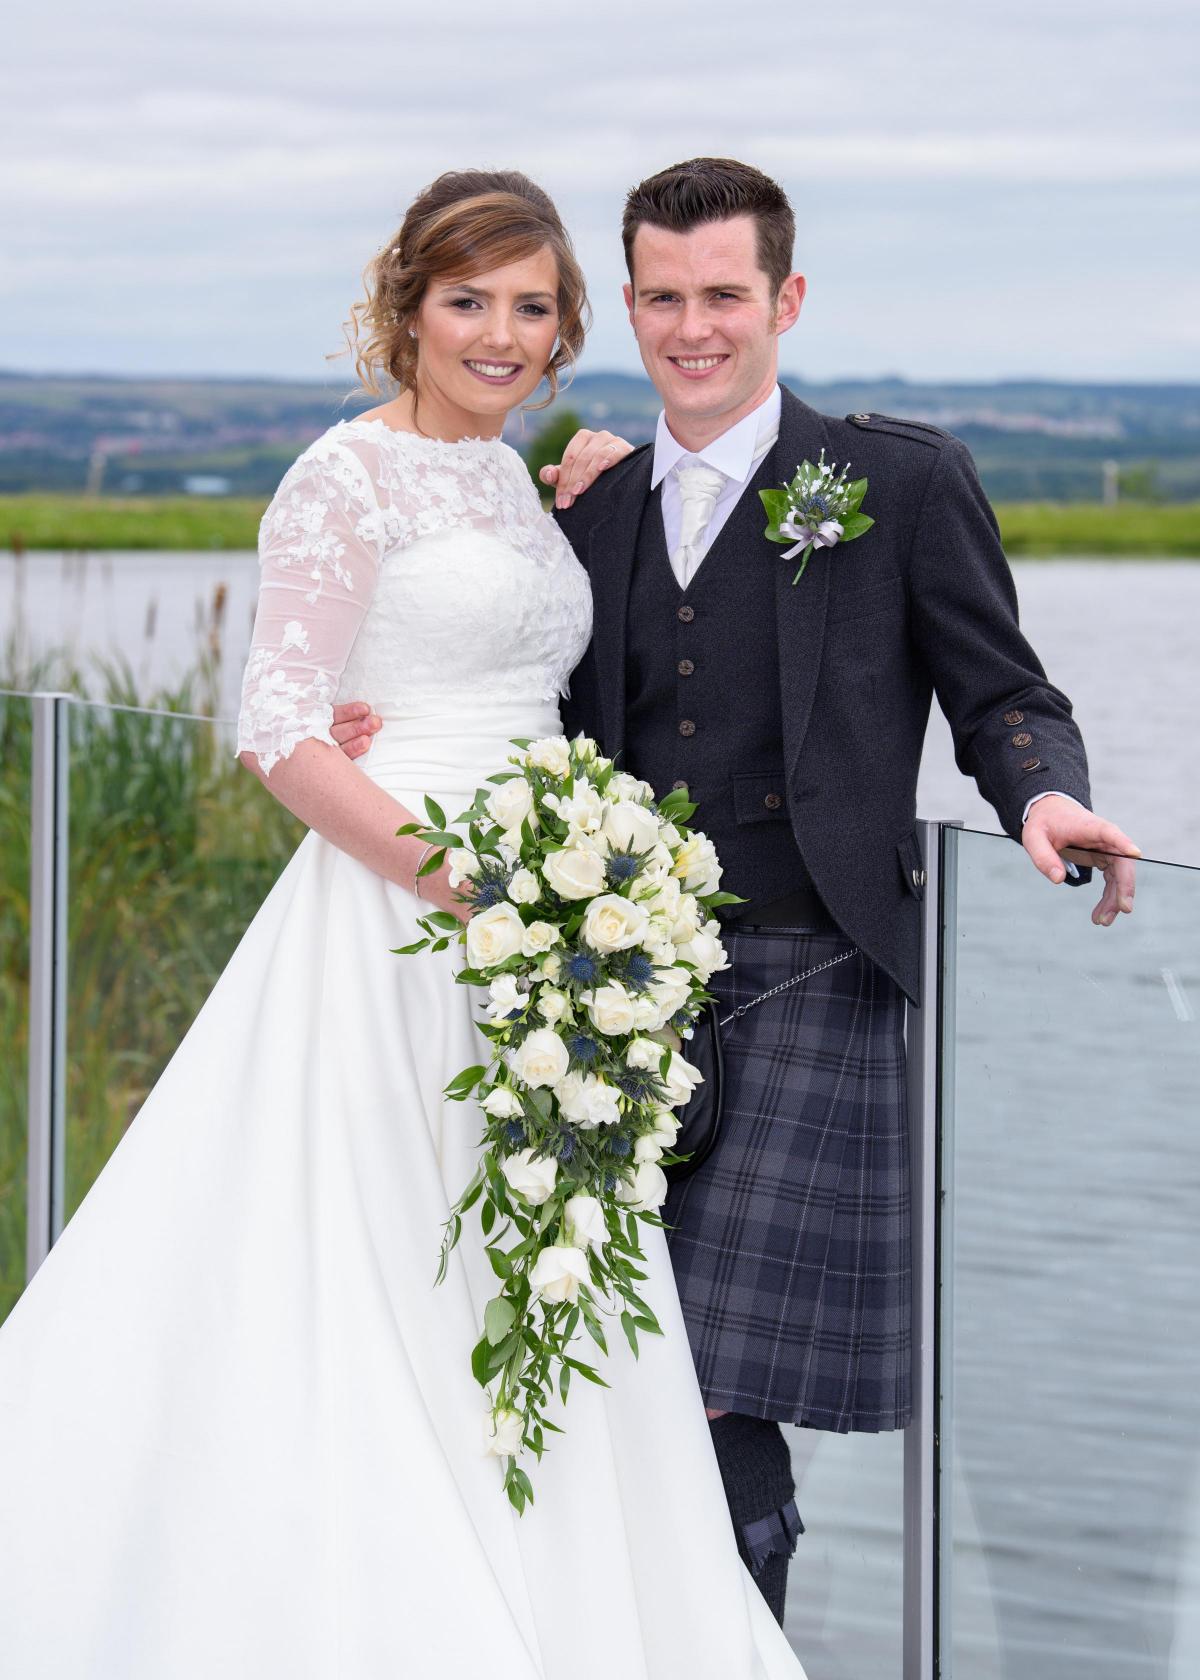 Kirsty Slattery and Stuart Barr, Harelaw Farm, Lanark, were married at The Vu 

Photo: George Stark Photography, Forth